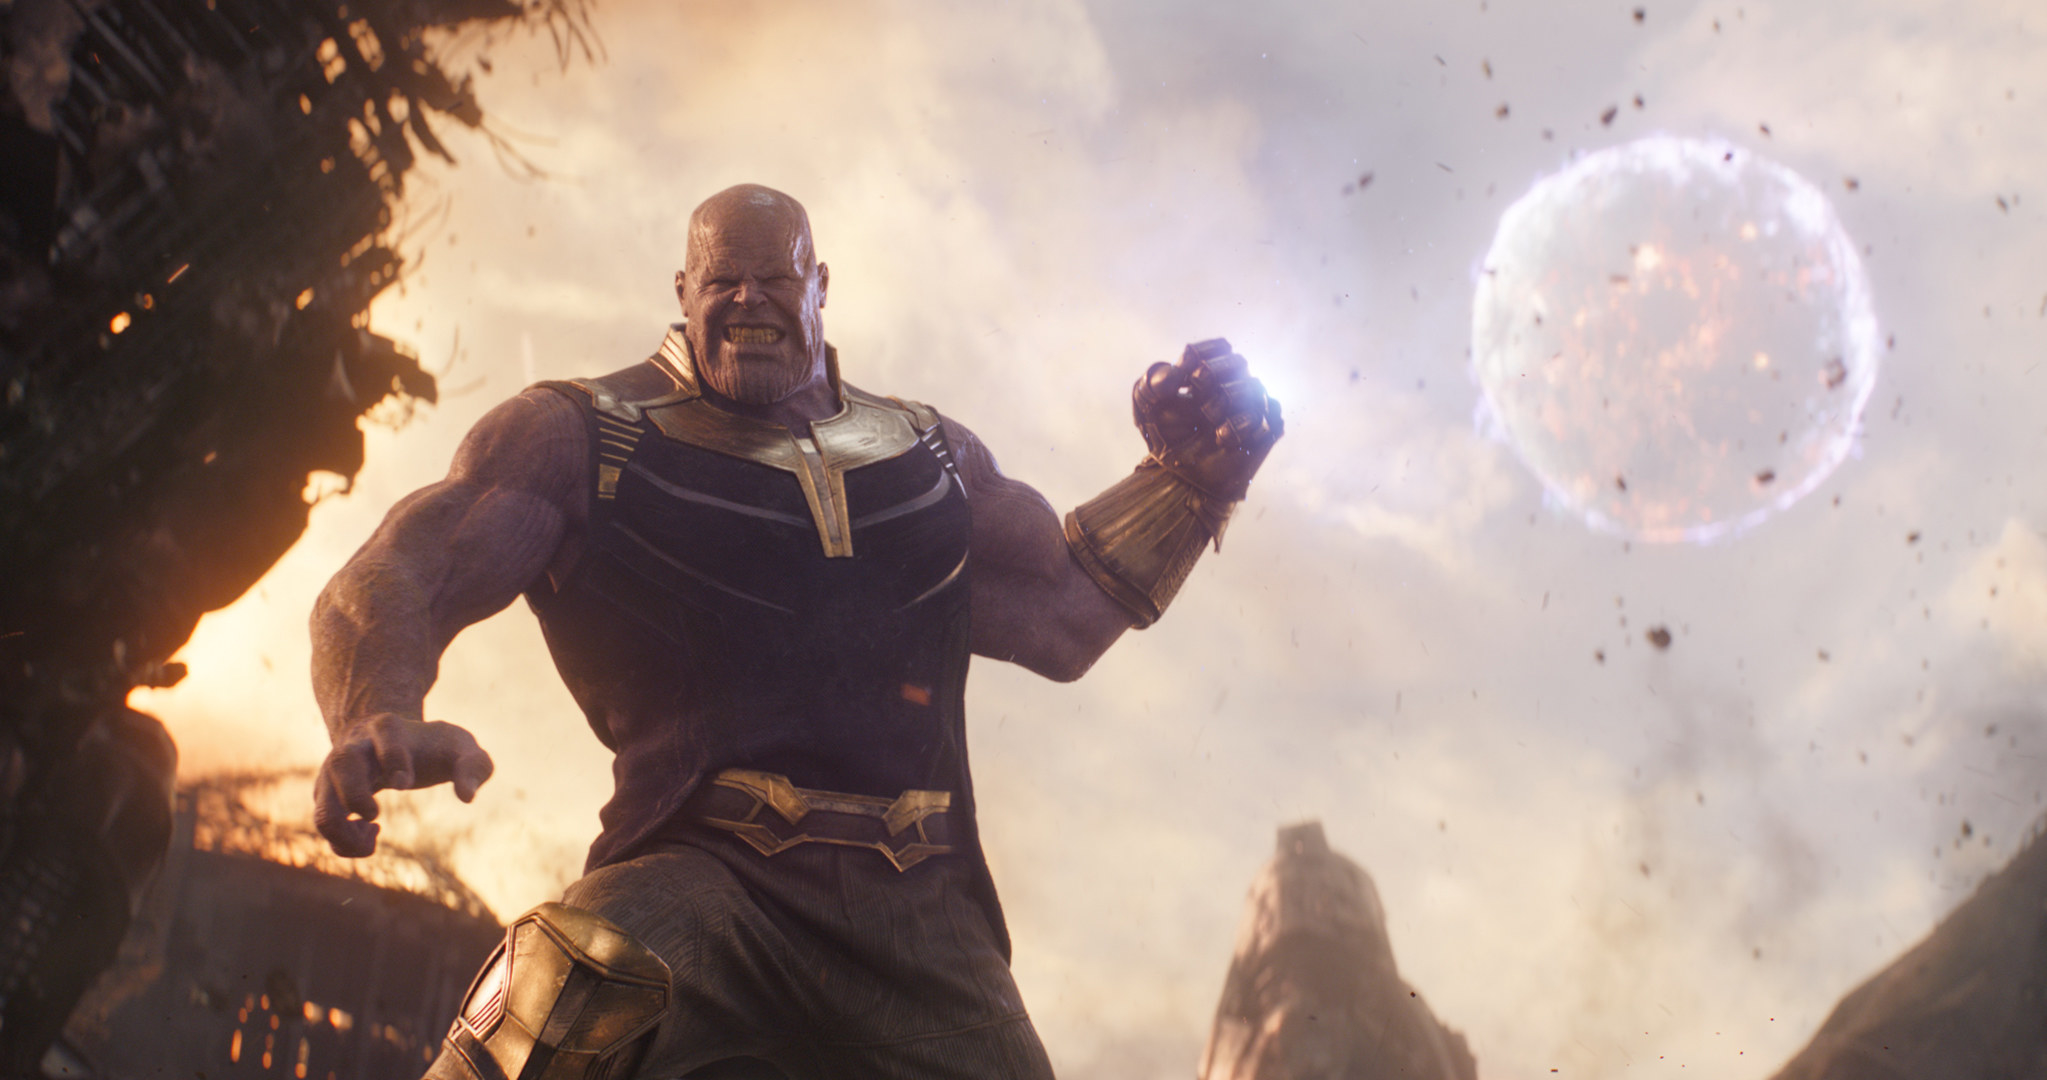 Thanos with the gauntlet